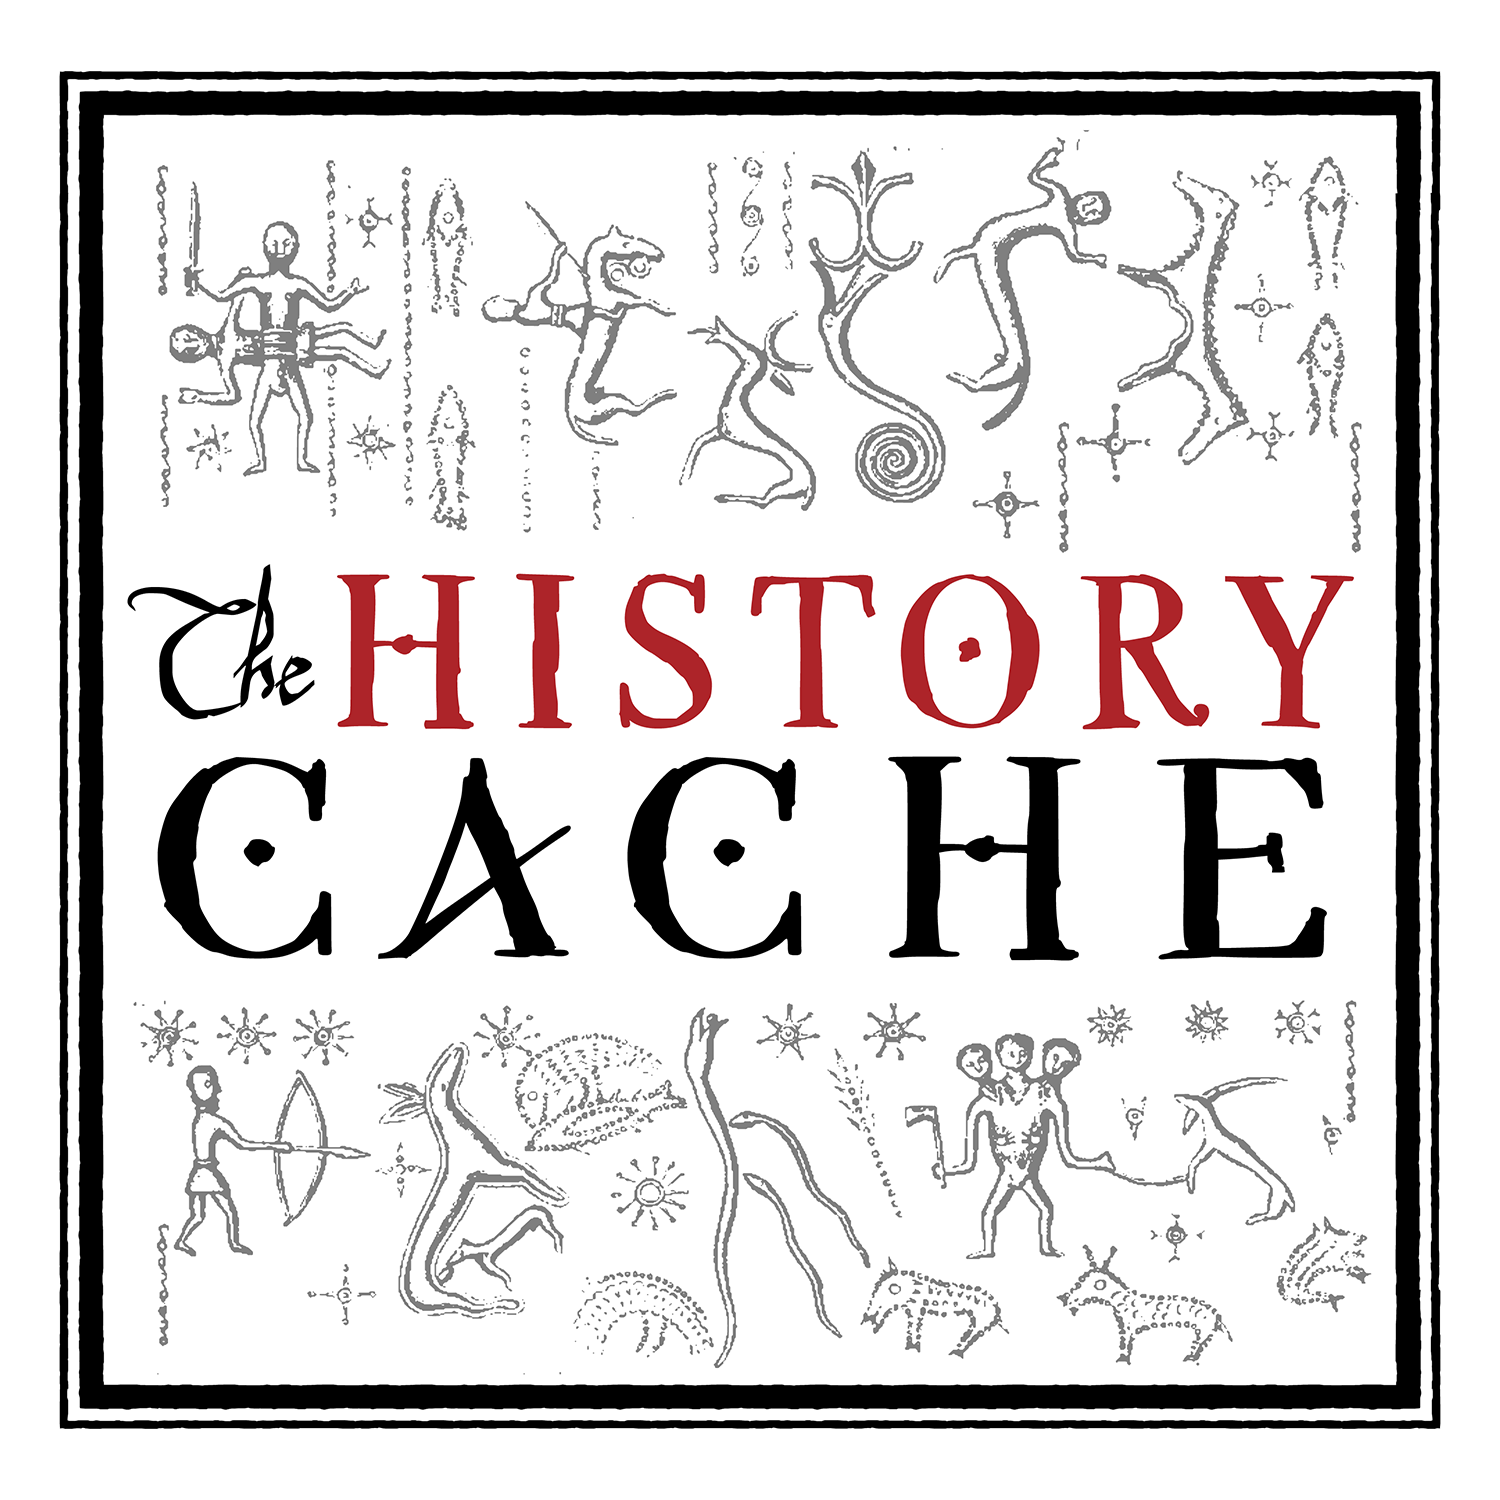 The History Cache Podcast